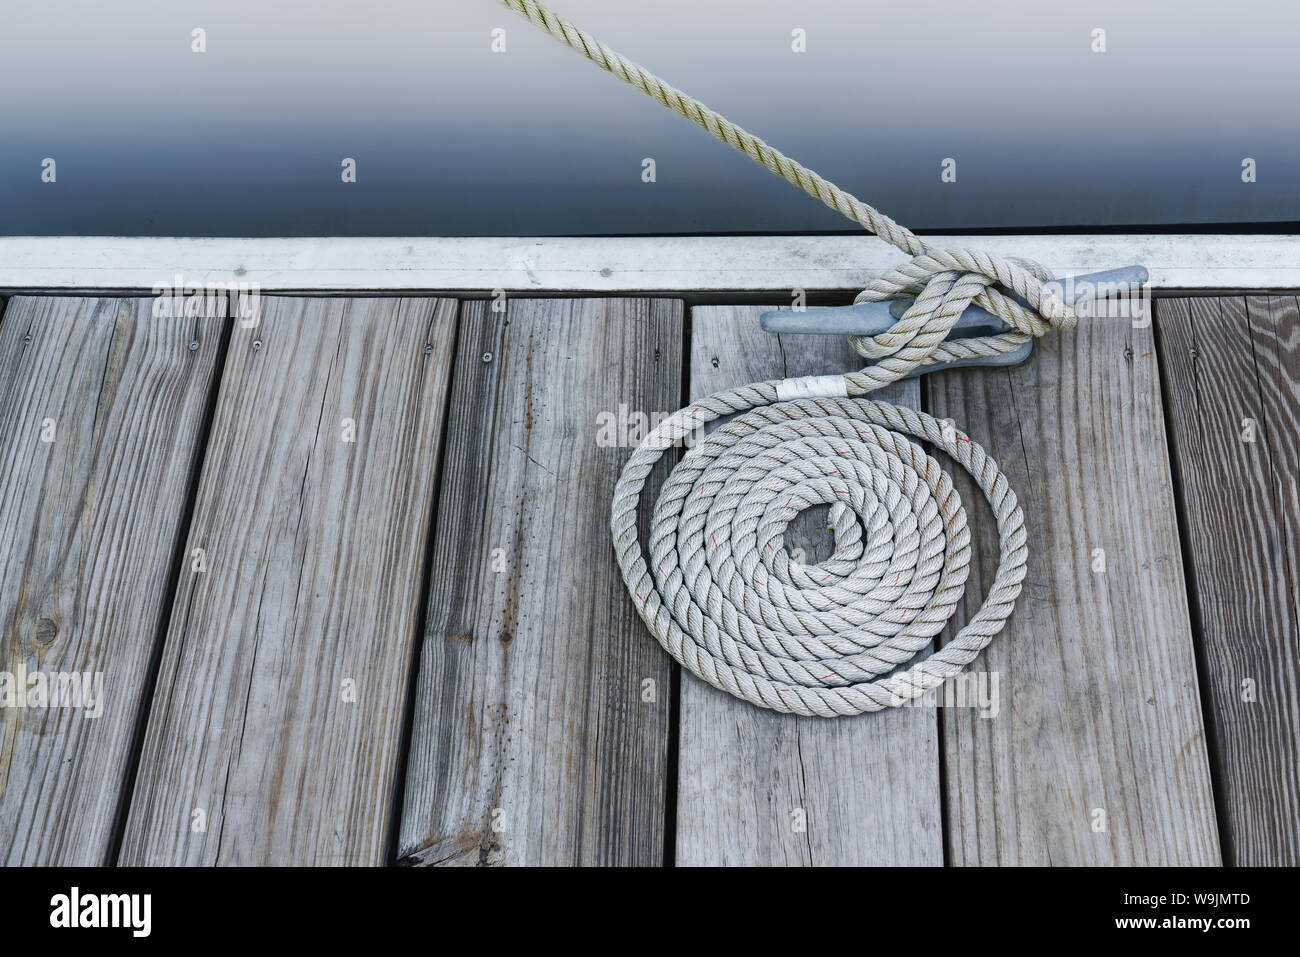 A coil of thick shipping rope on the stone floor of a shed